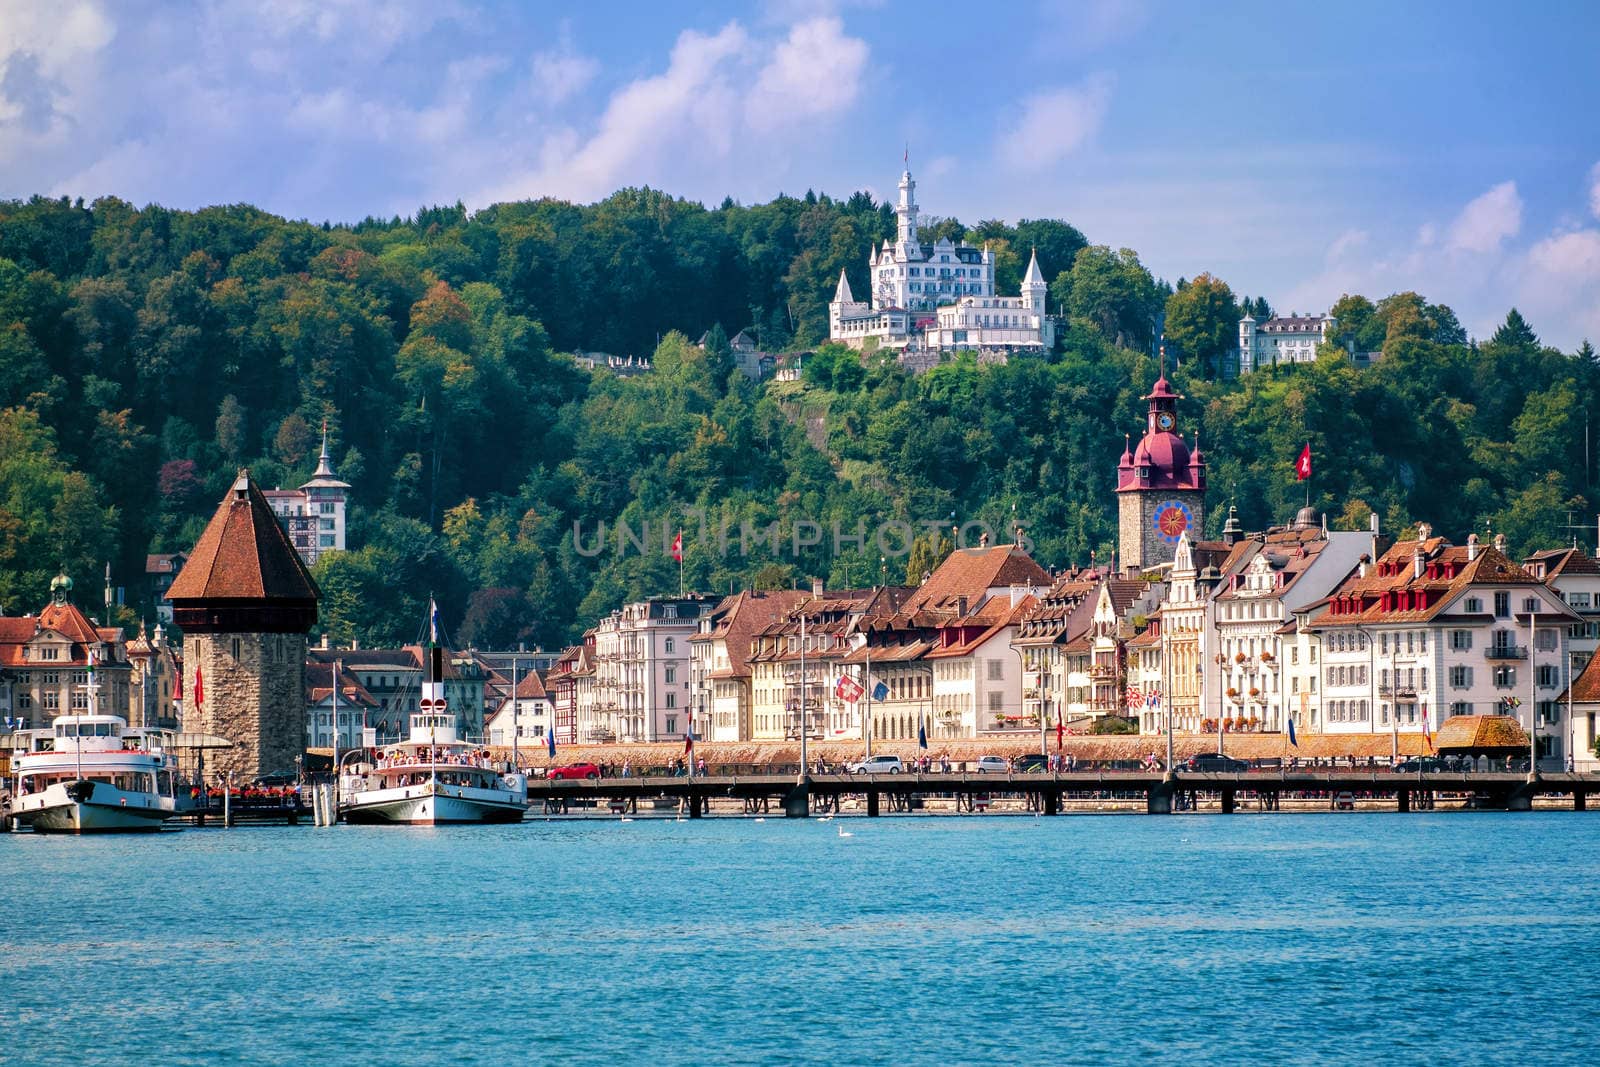 Lucerne, Switzerland, view of the old town from Lake Lucerne by GlobePhotos